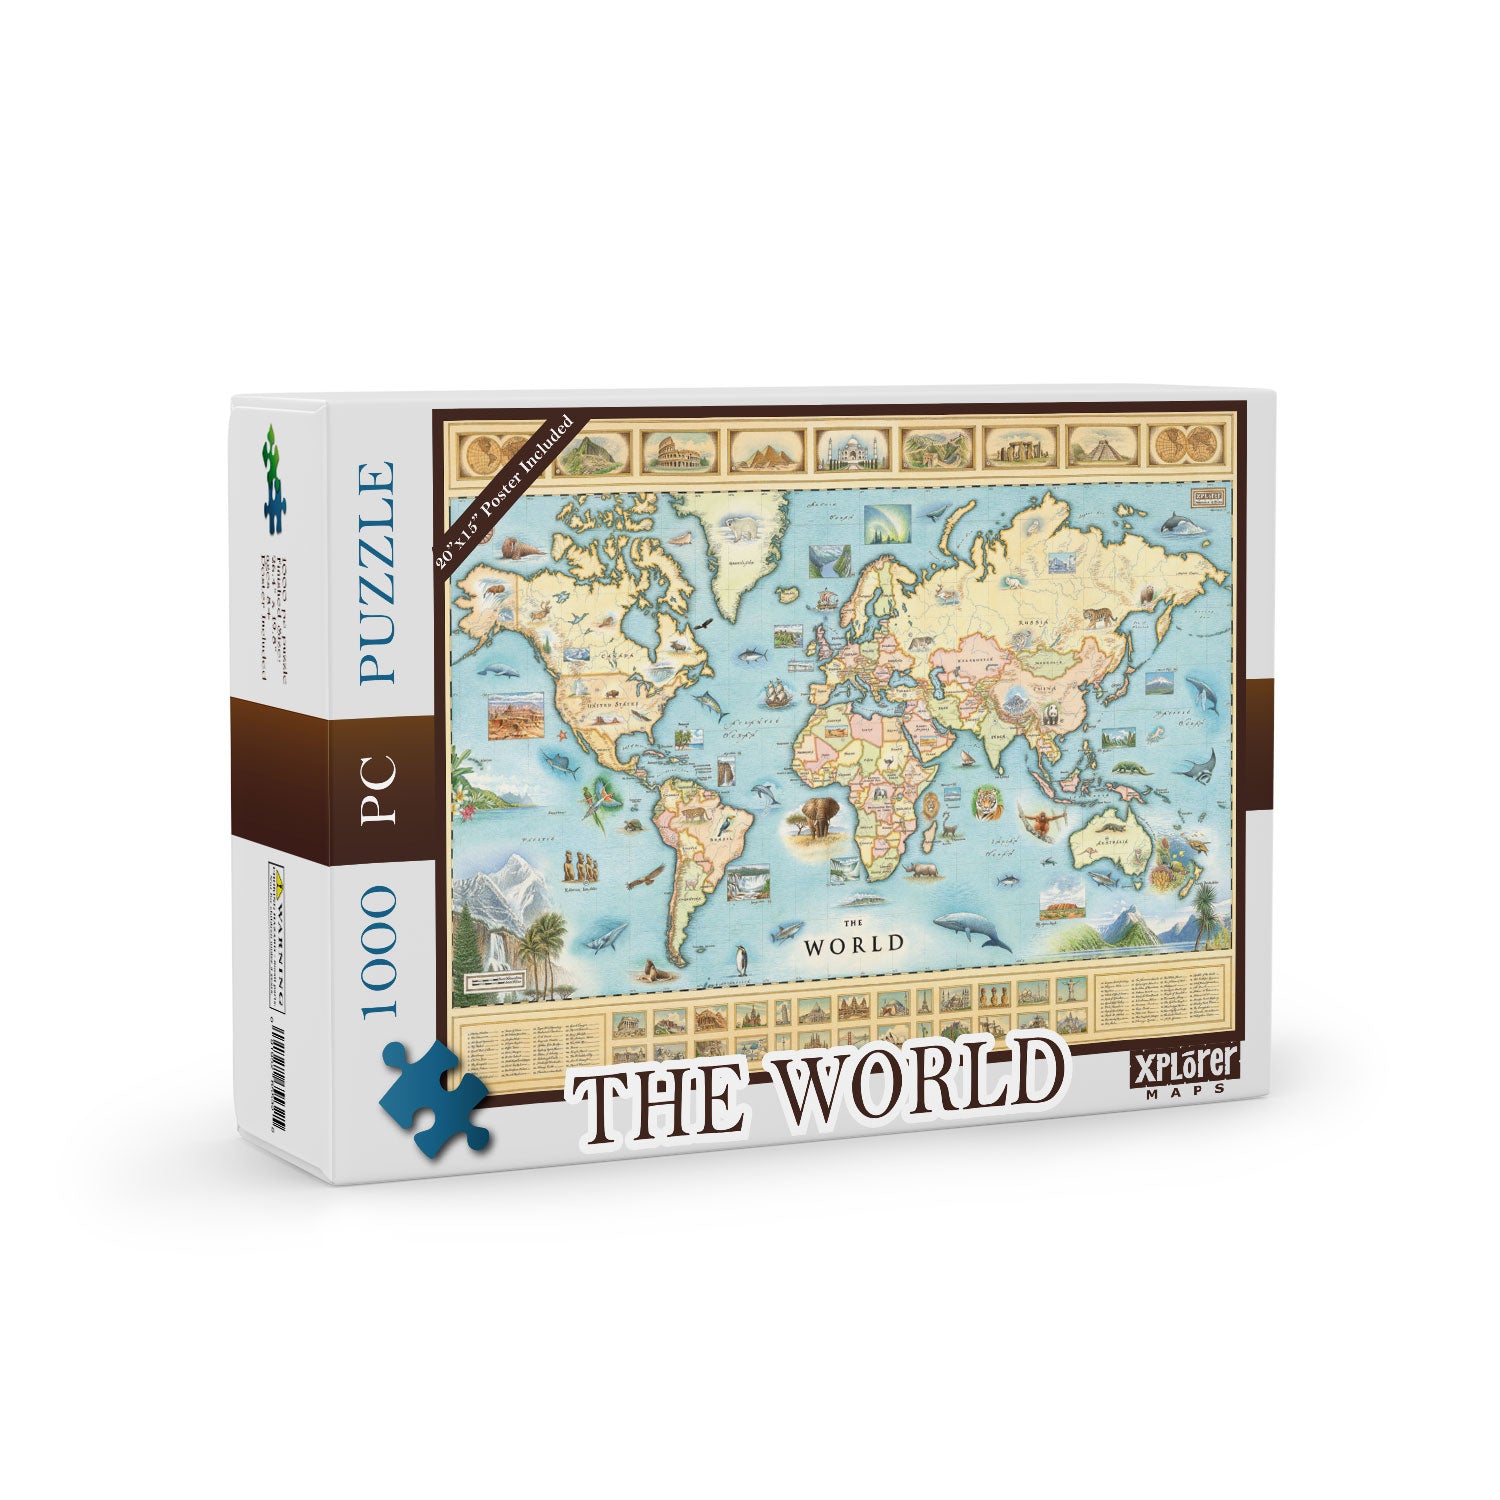 World Map Jigsaw Puzzle by Xplorer Maps. features the entire world with illustrations of significant places and major flora and fauna. Some places include Machu Pichu, the Eiffel Tower, Mount Everest, and Easter Island. 